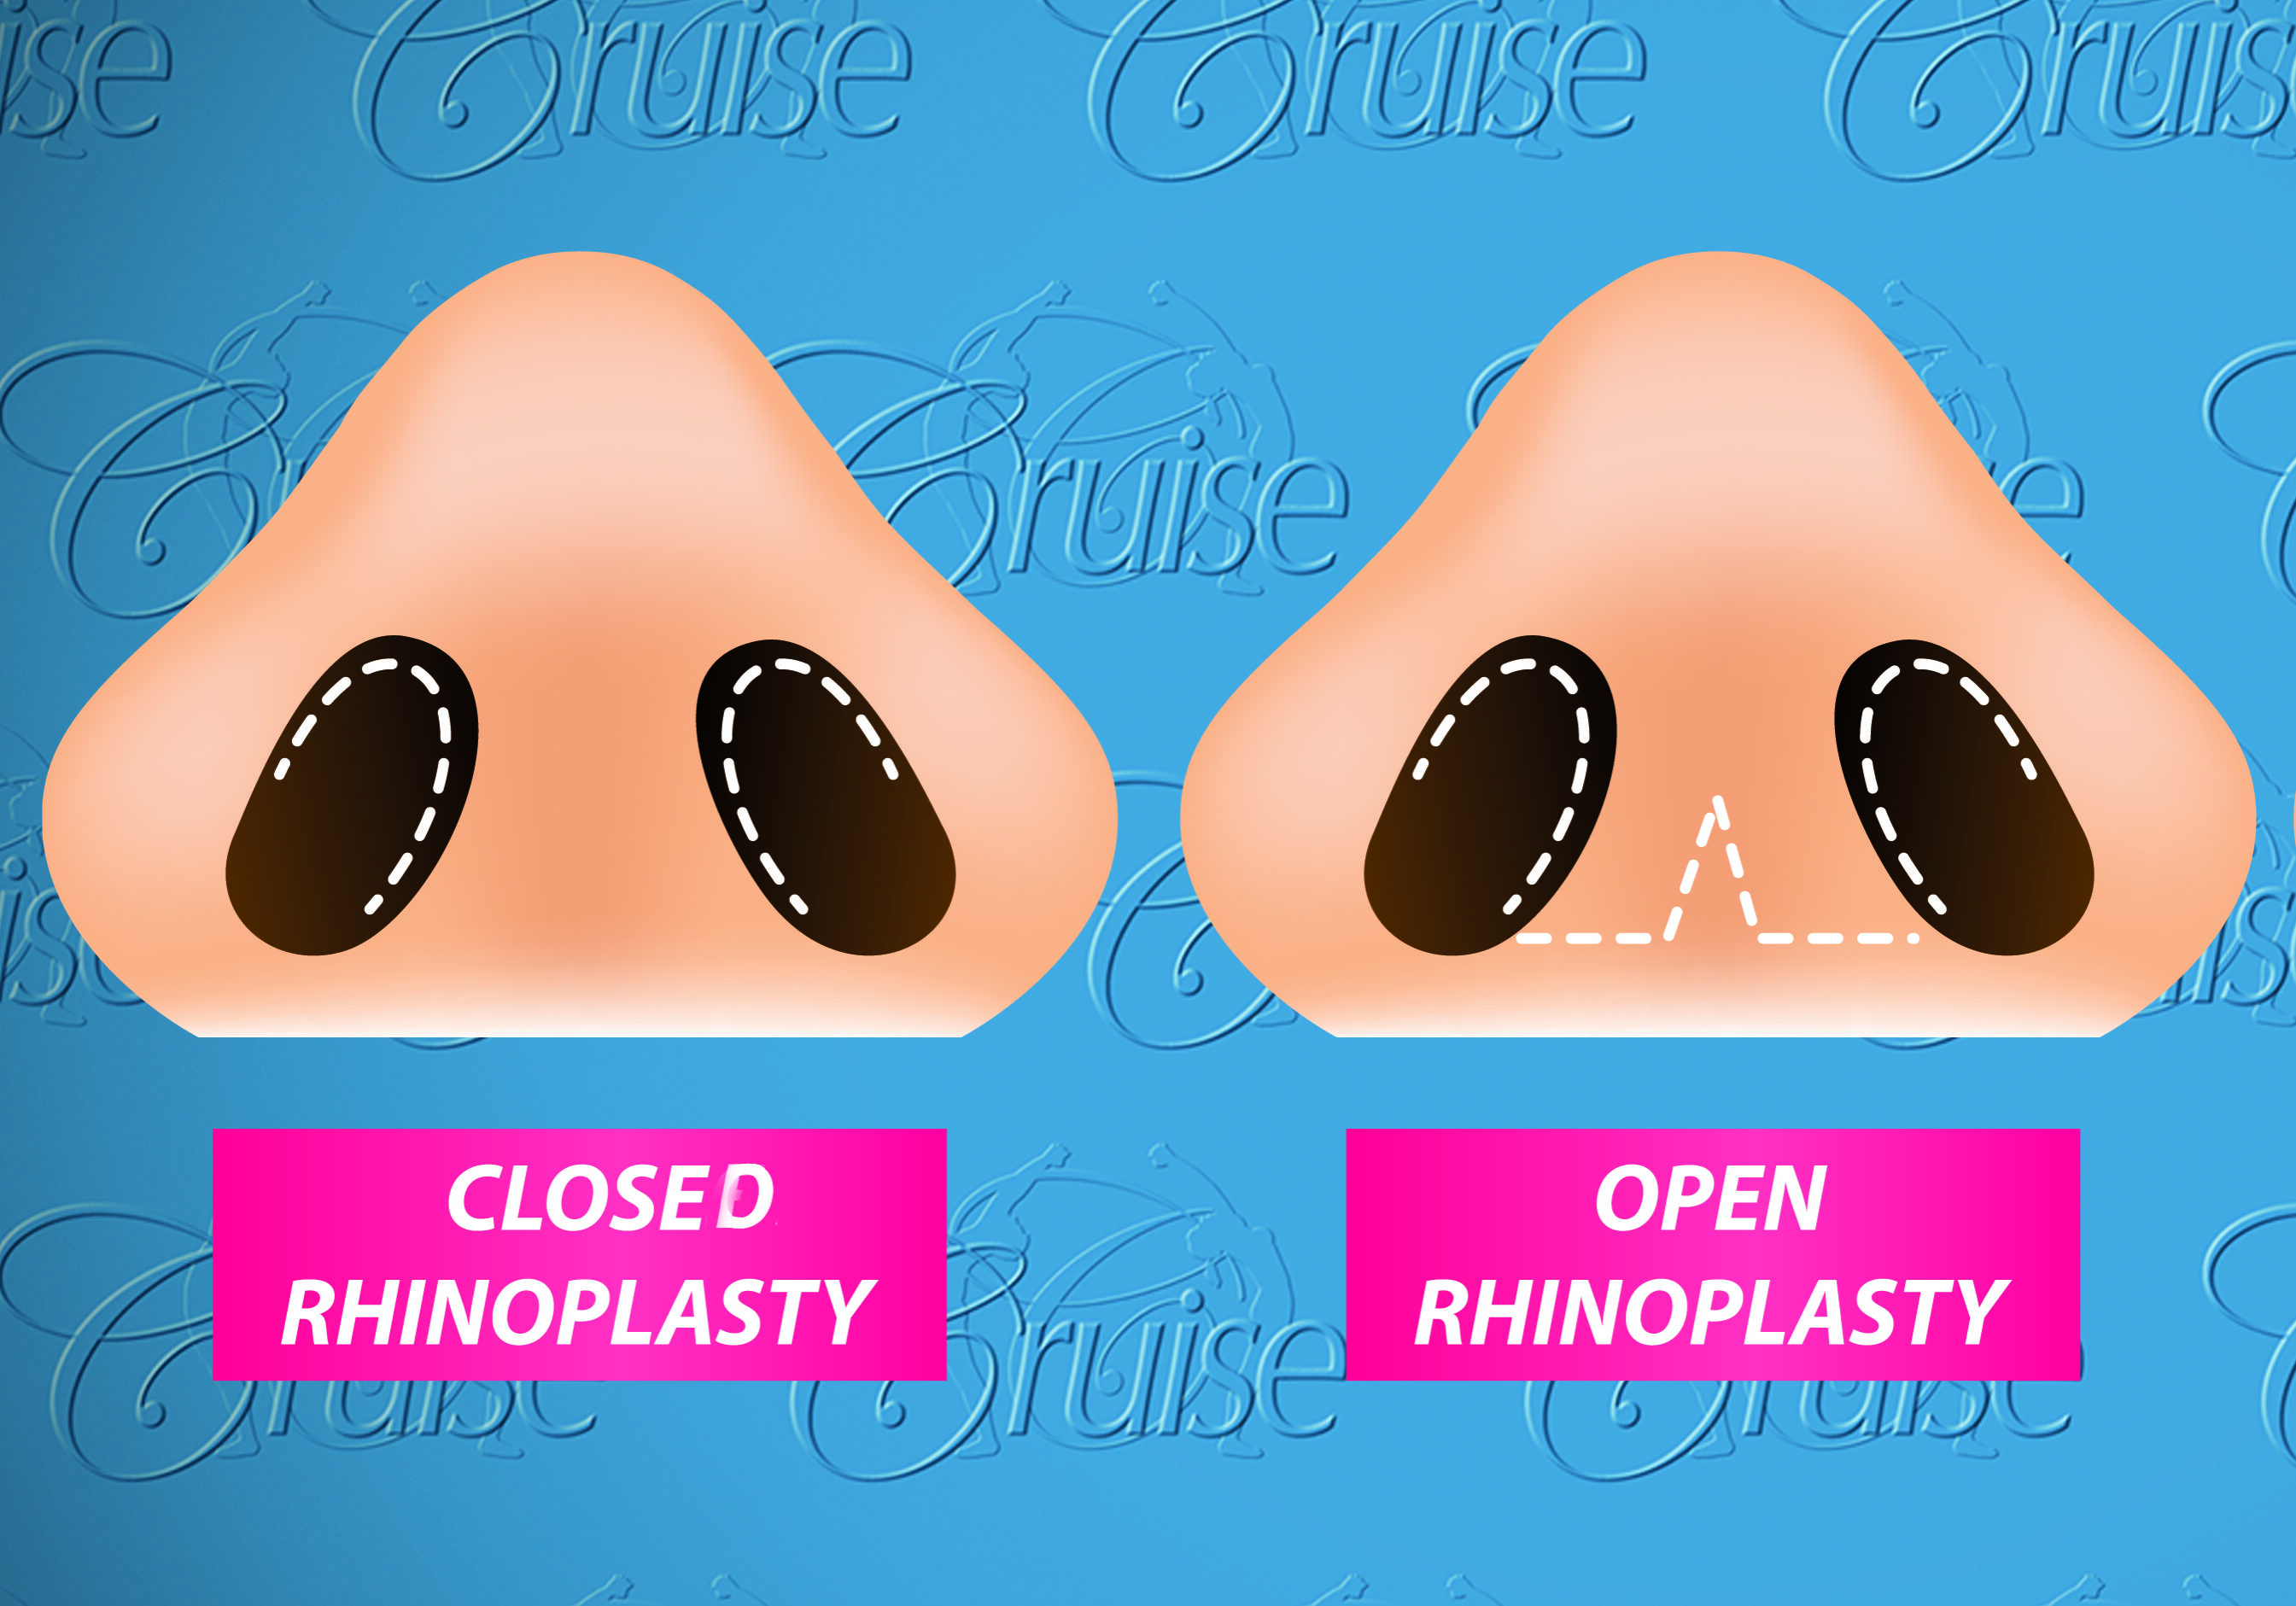 Open and Closed Rhinoplasty